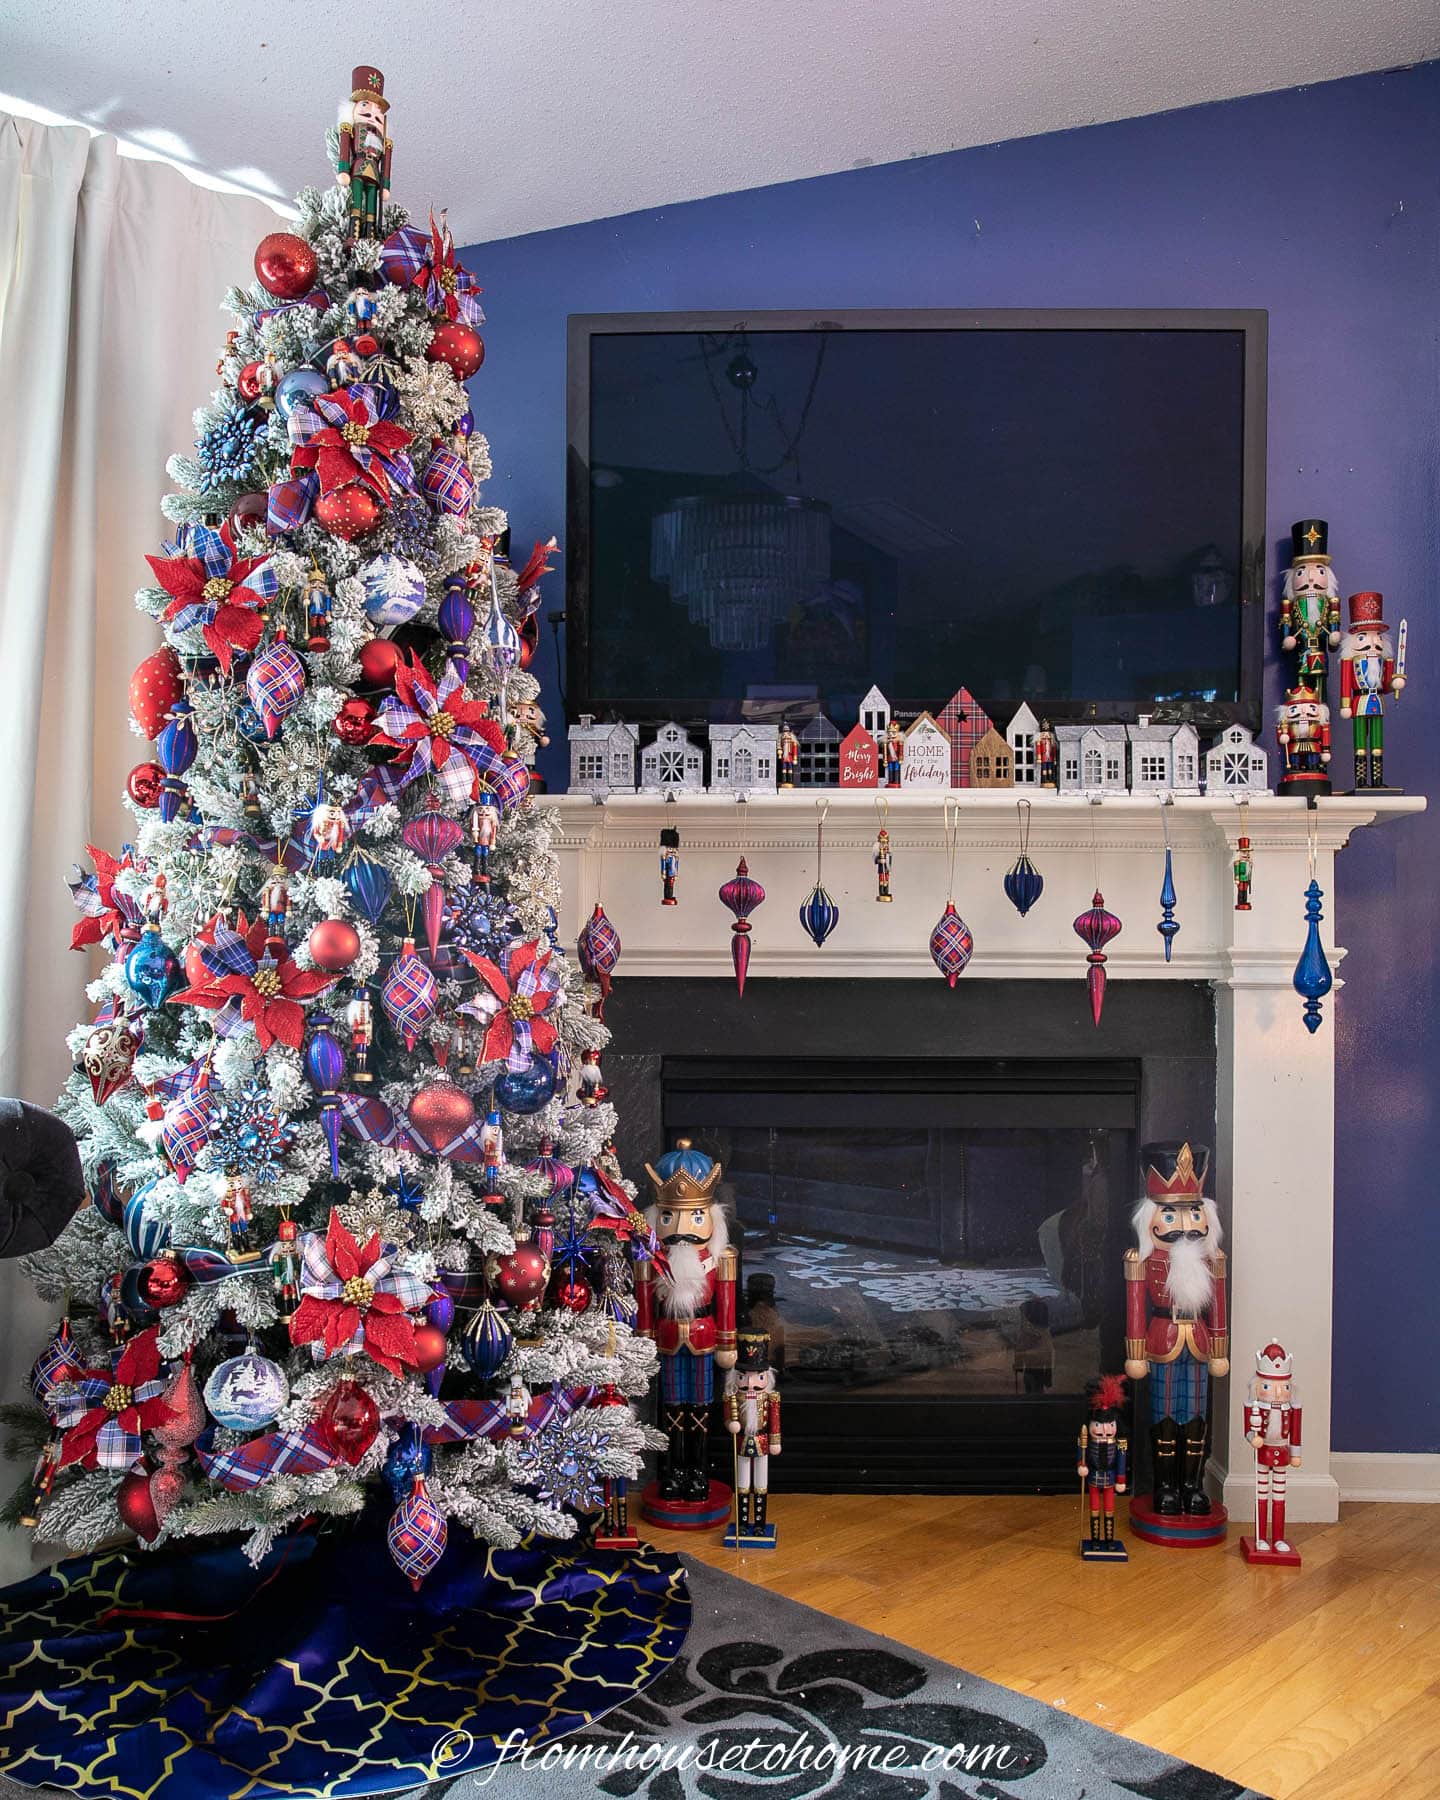 Nutcracker Christmas tree beside a fireplace decorated with red and blue ornaments and nutcrackers